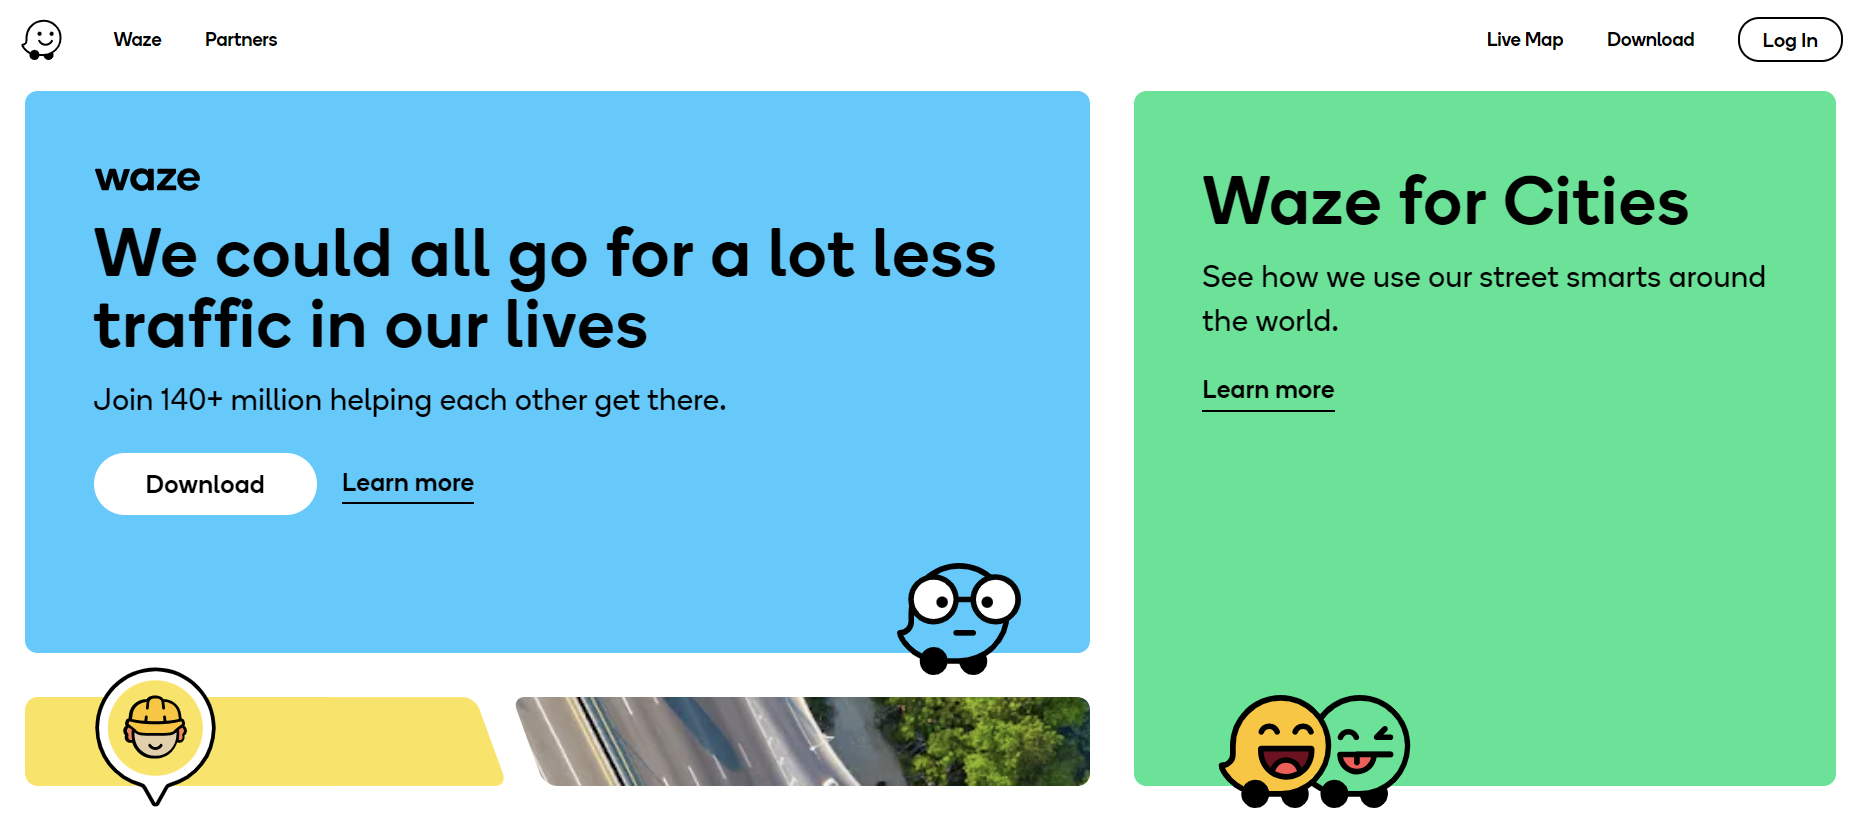 Waze, a mobile navigation application, founded in 2008 in Israel